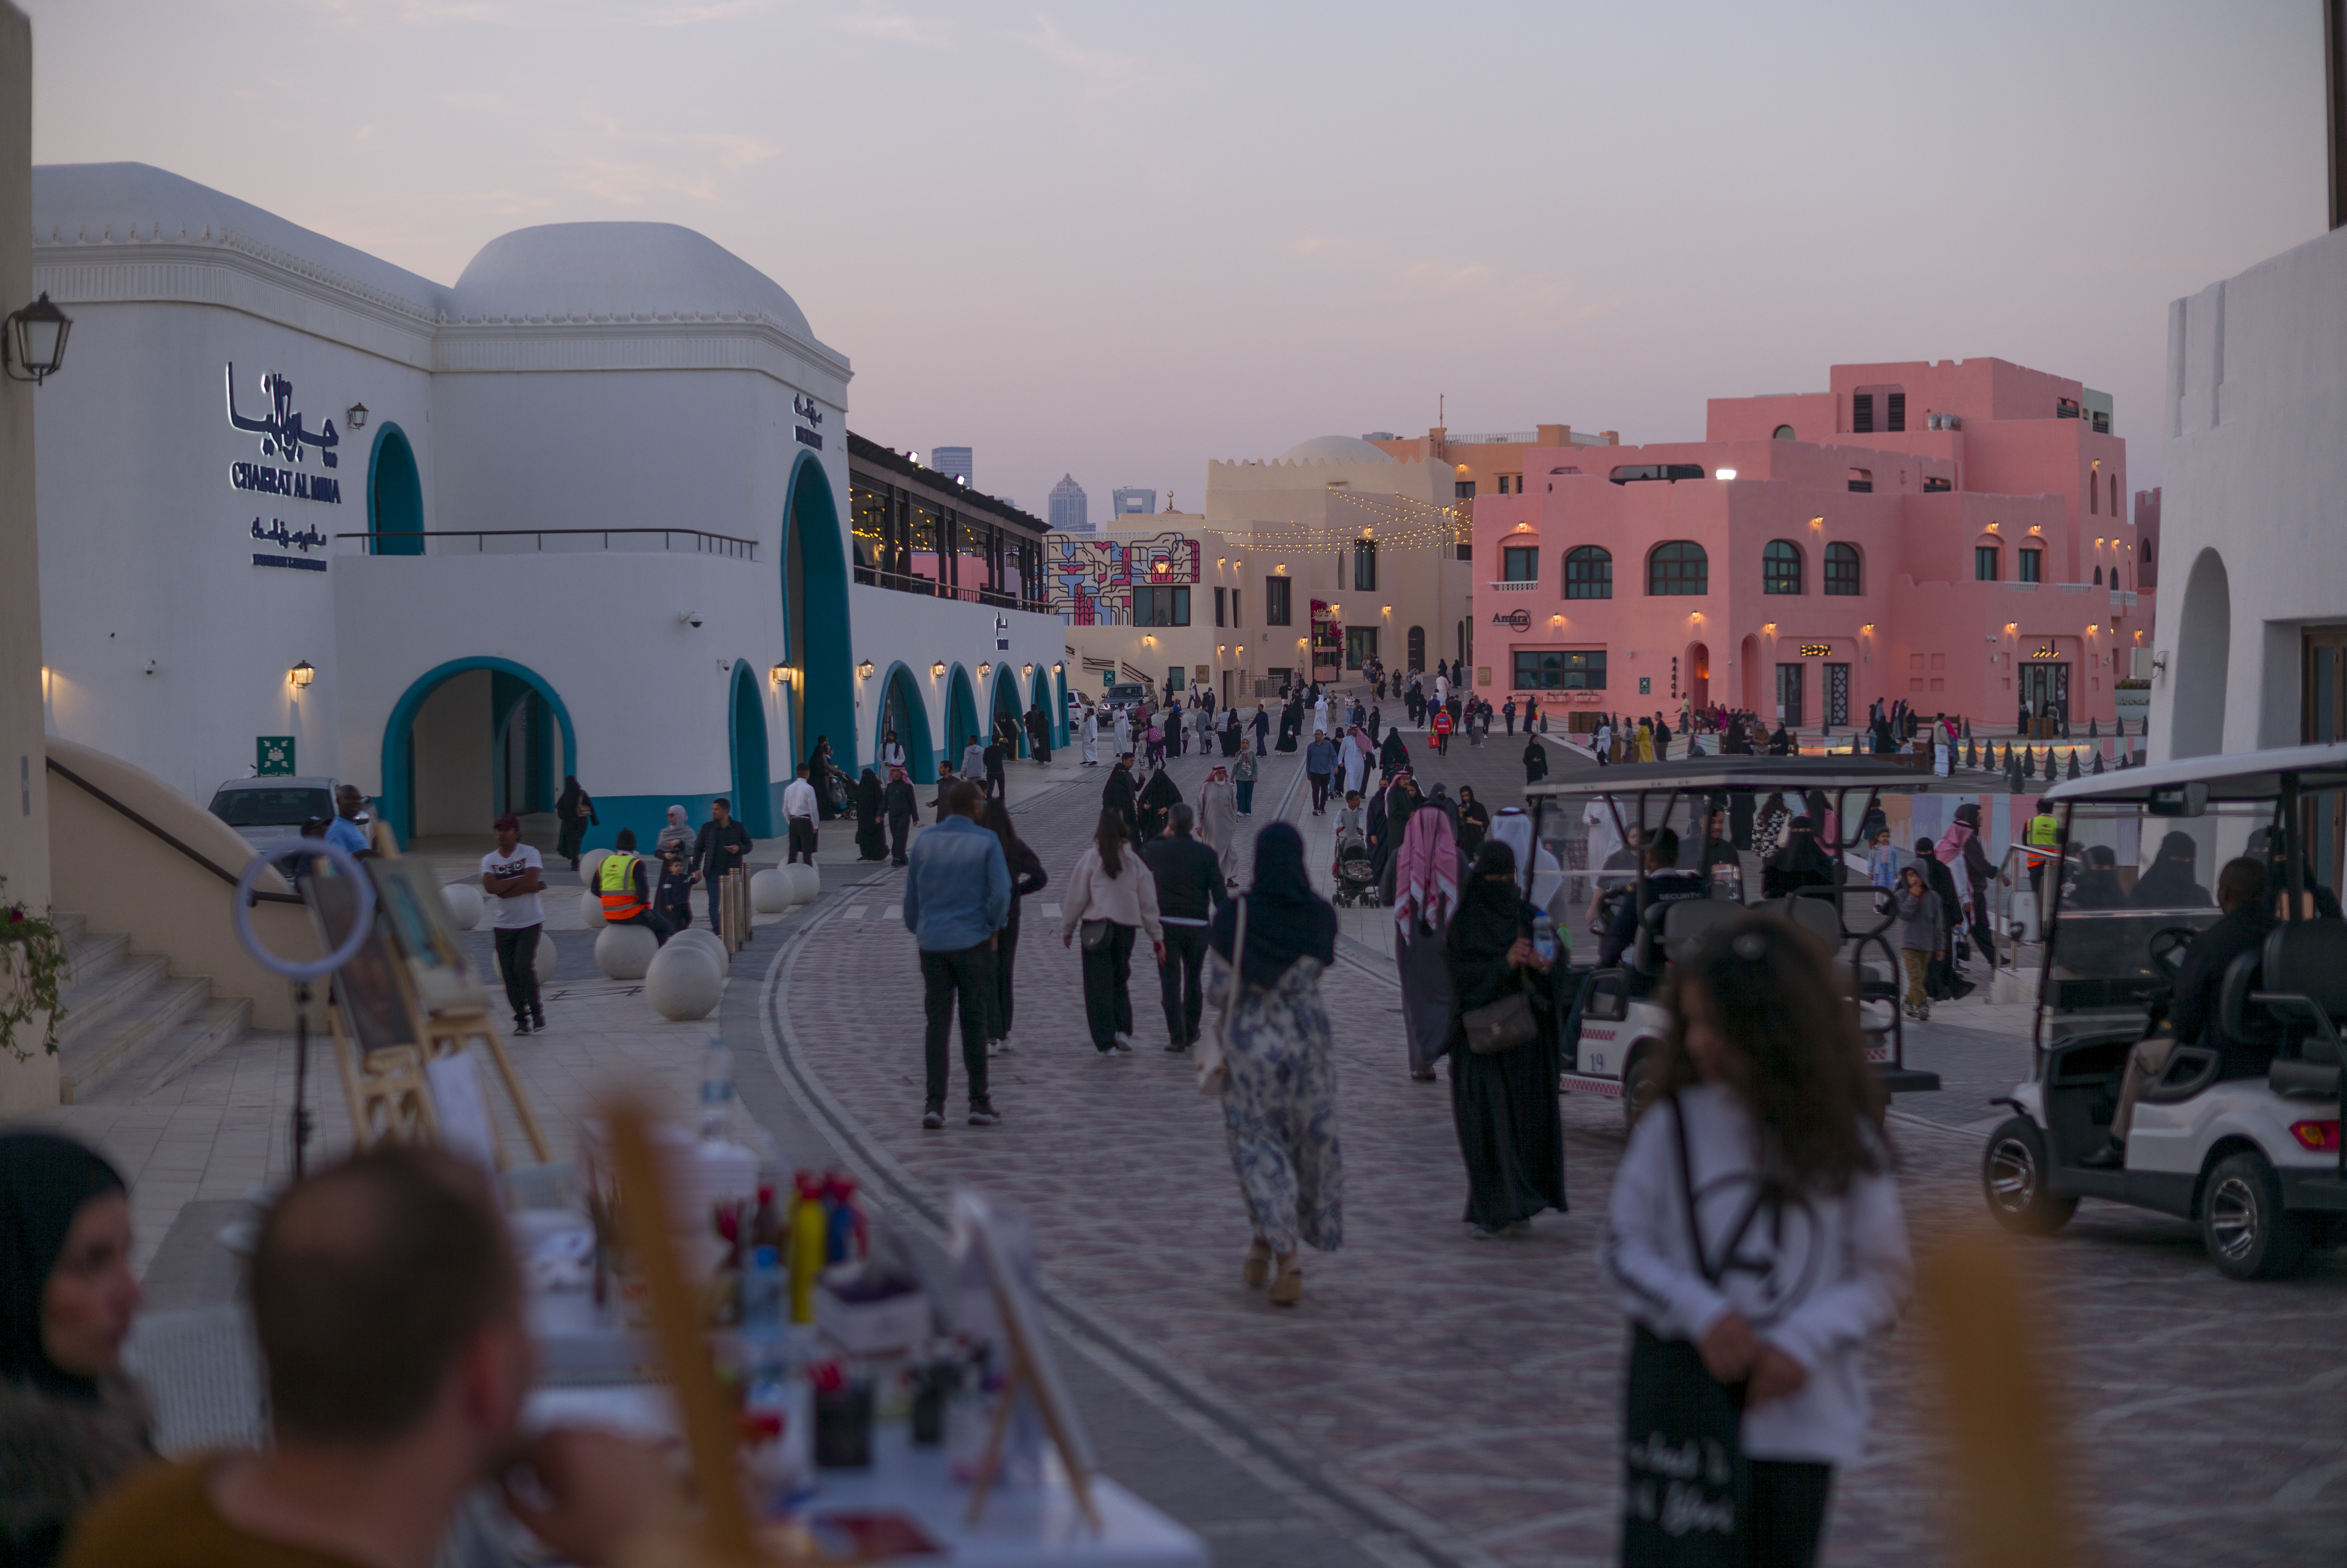 A bustling marketplace, surrounded by stone buildings. People walking about the street, some are standing to observe paintings at an outdoors stall. This is Souq Waqif.